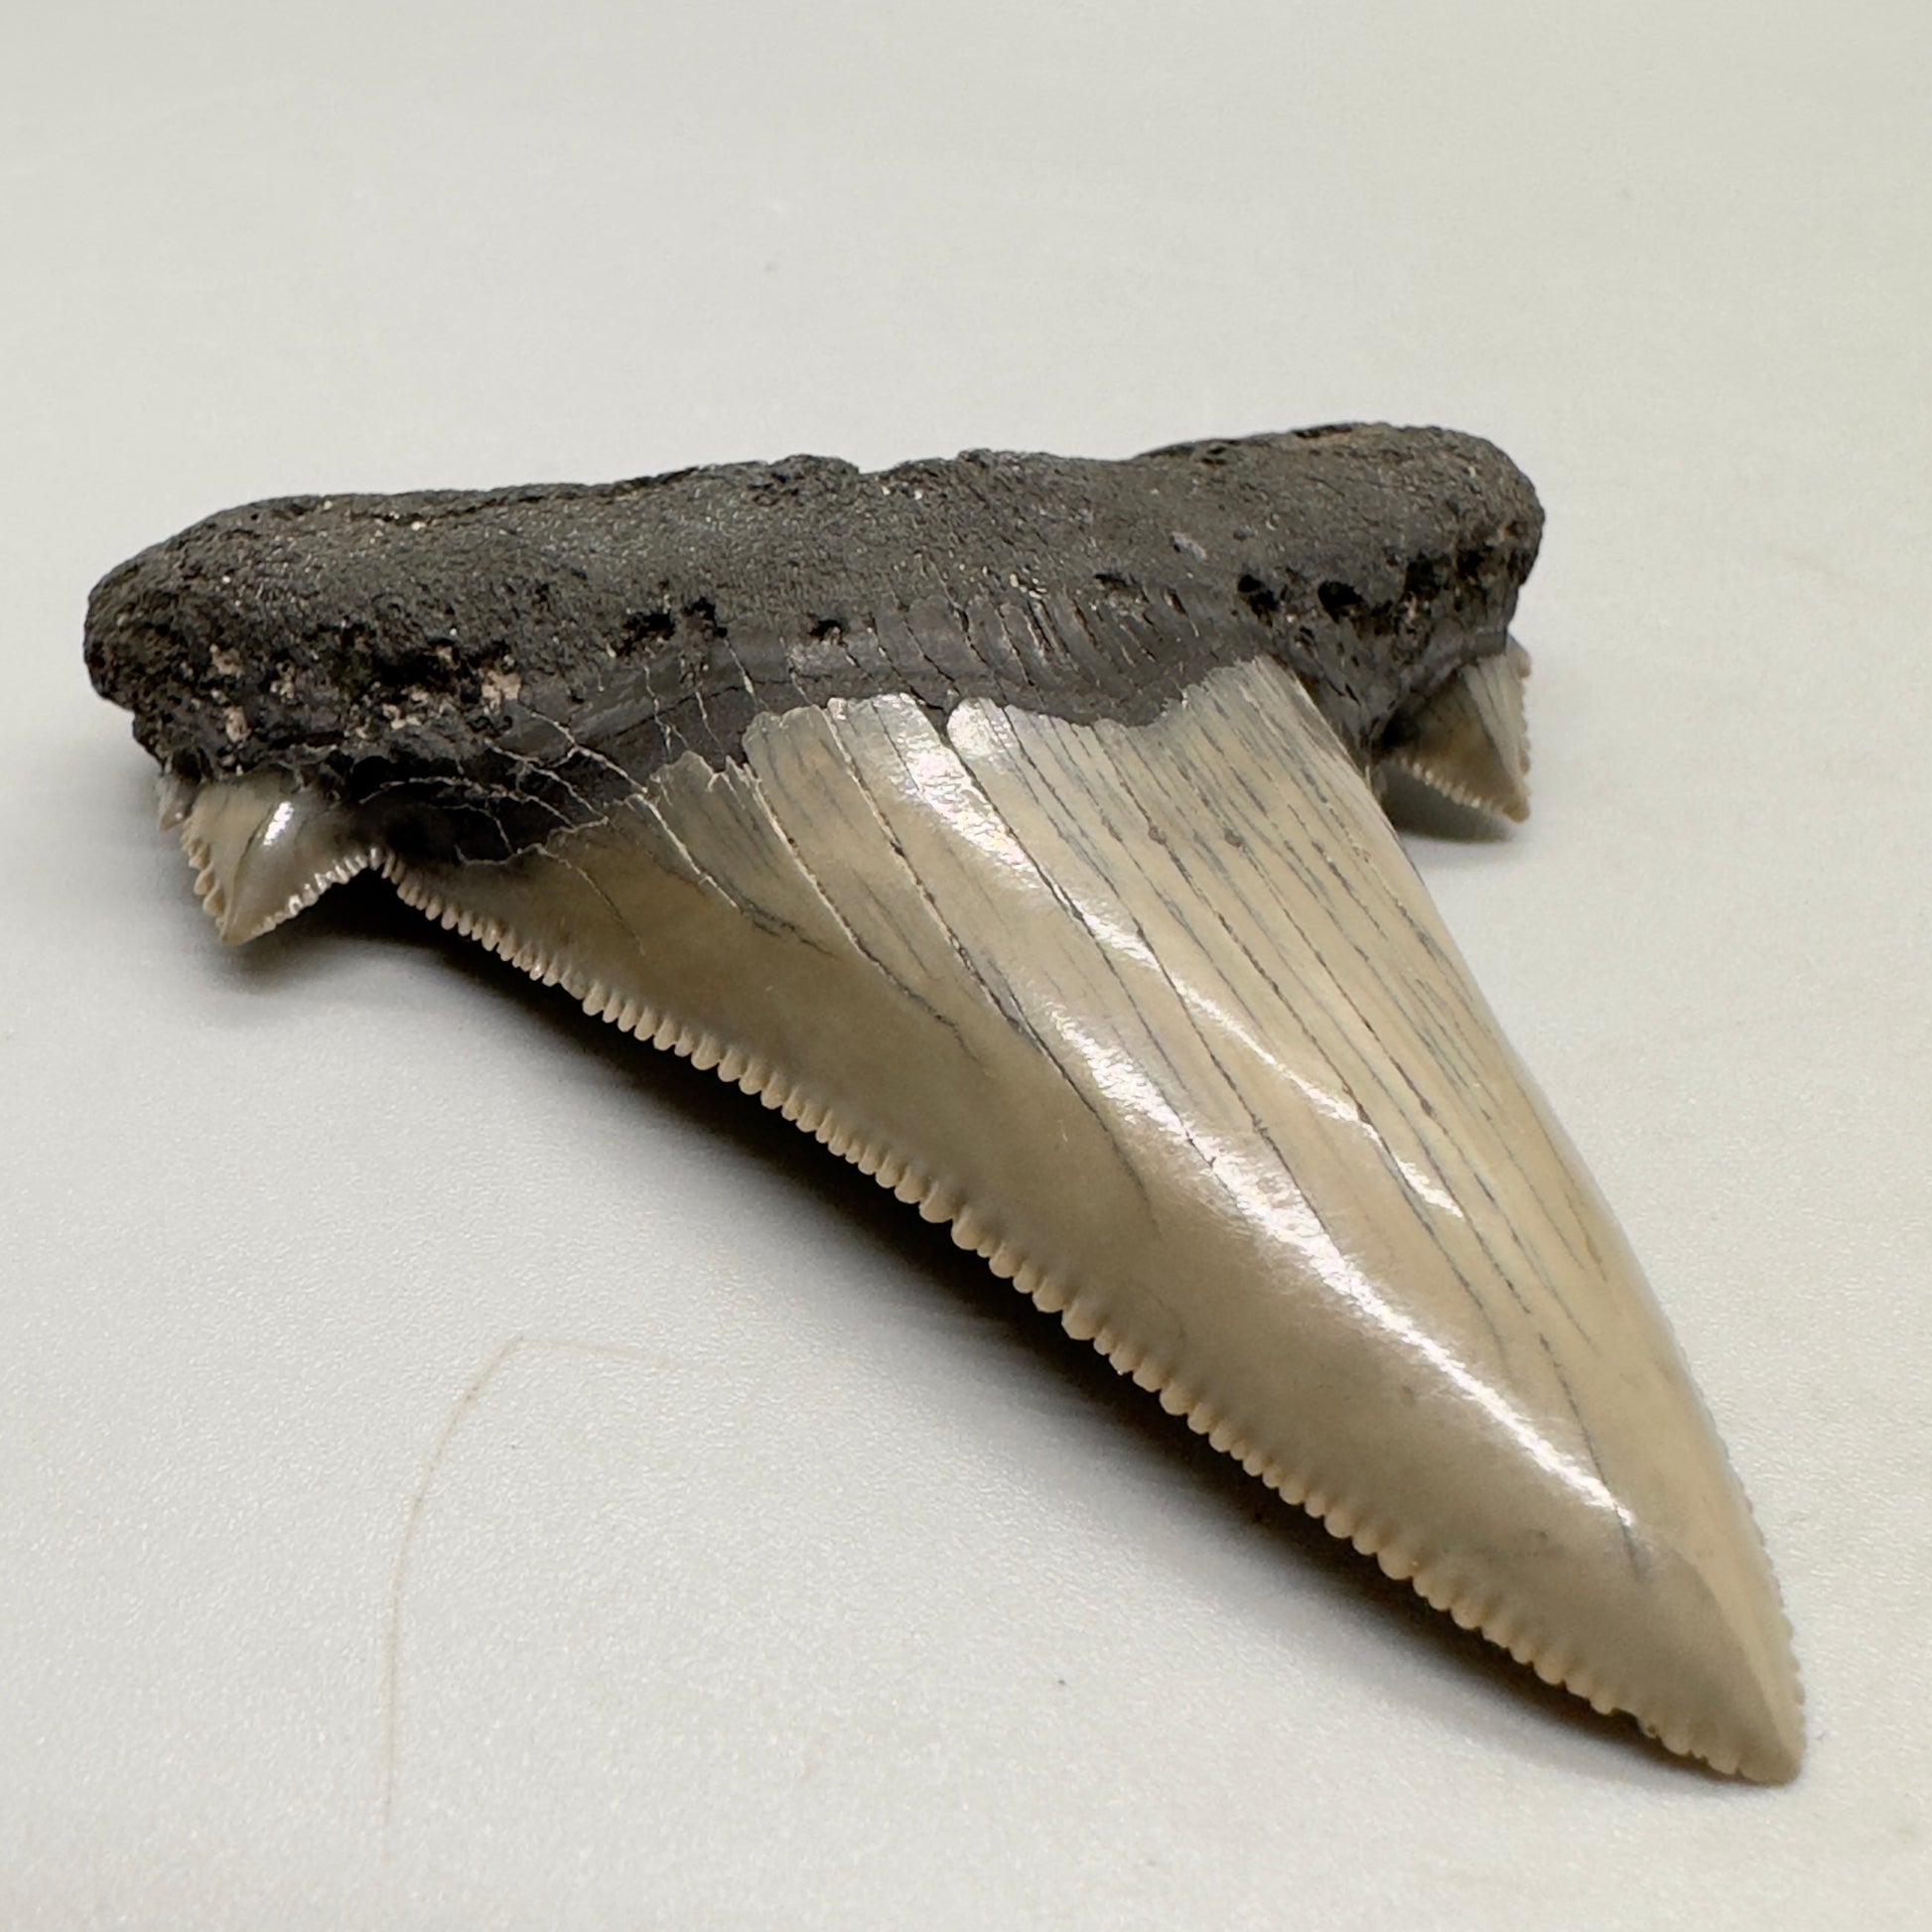 Large, sharply serrated 2.71 inches Carcharocles sokolowi (auriculatus) shark tooth from South Carolina AU366 front left